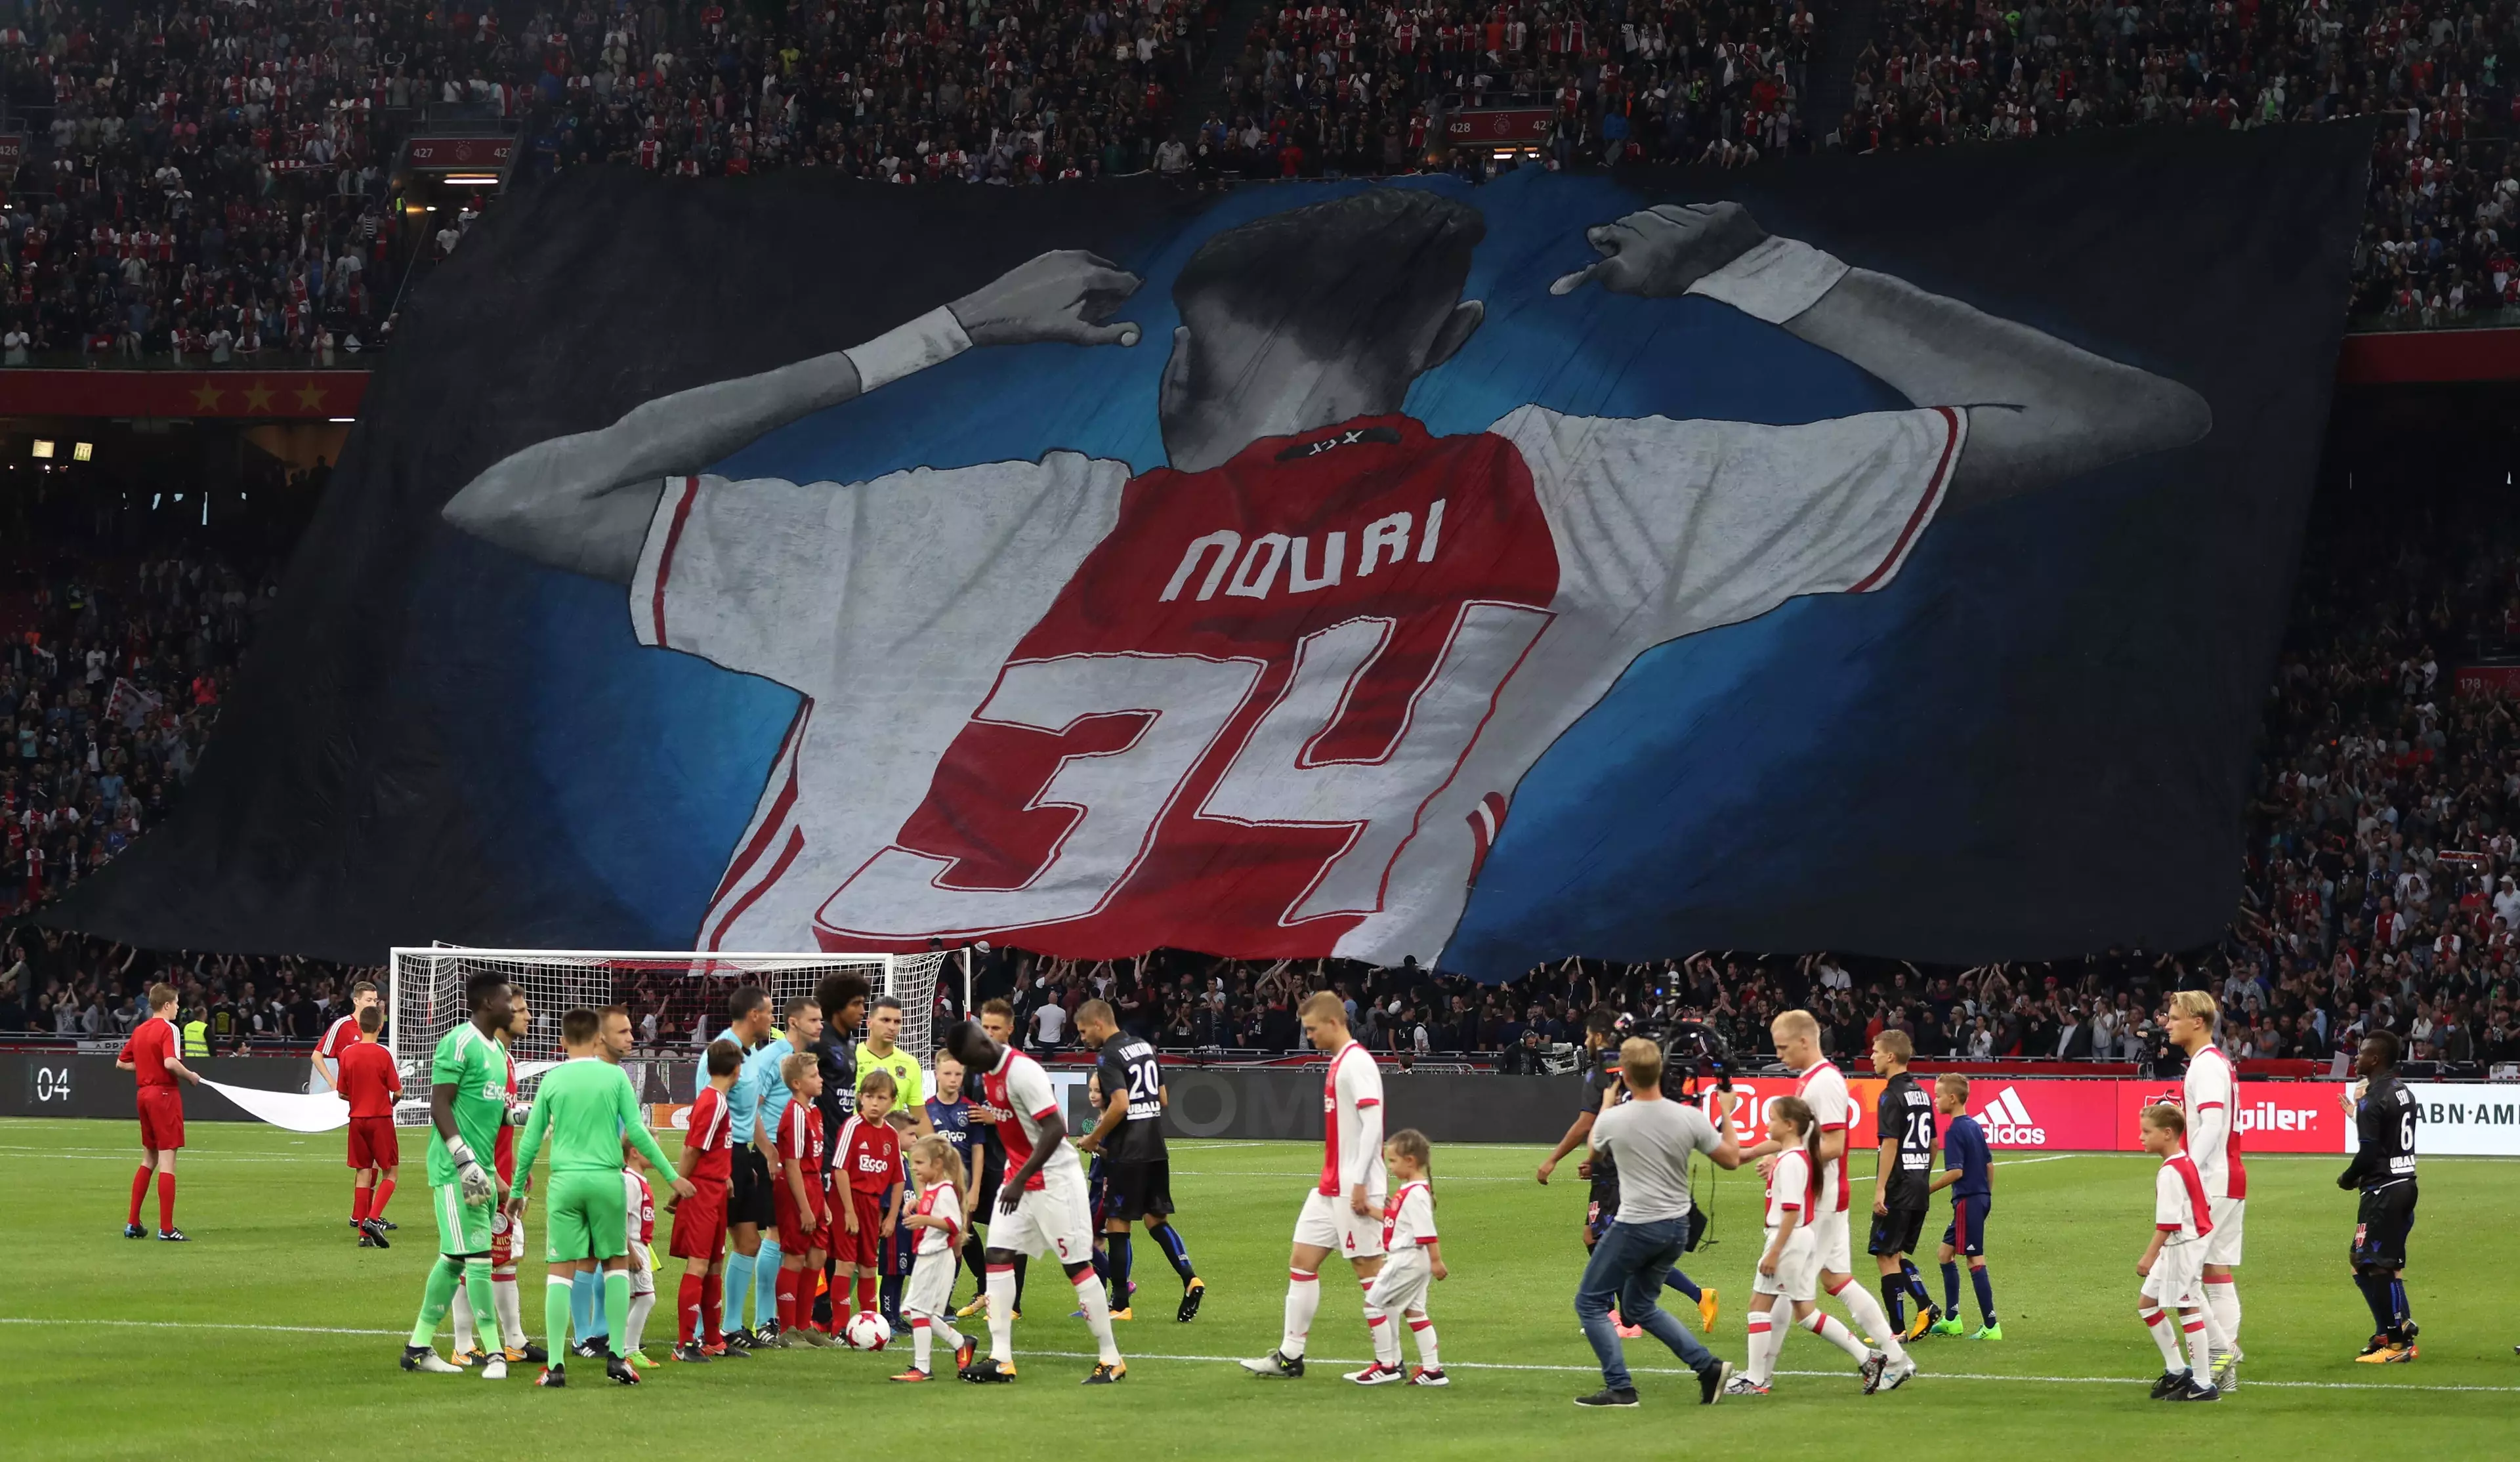 Ajax fans pay tribute to Nouri. Image: PA Images